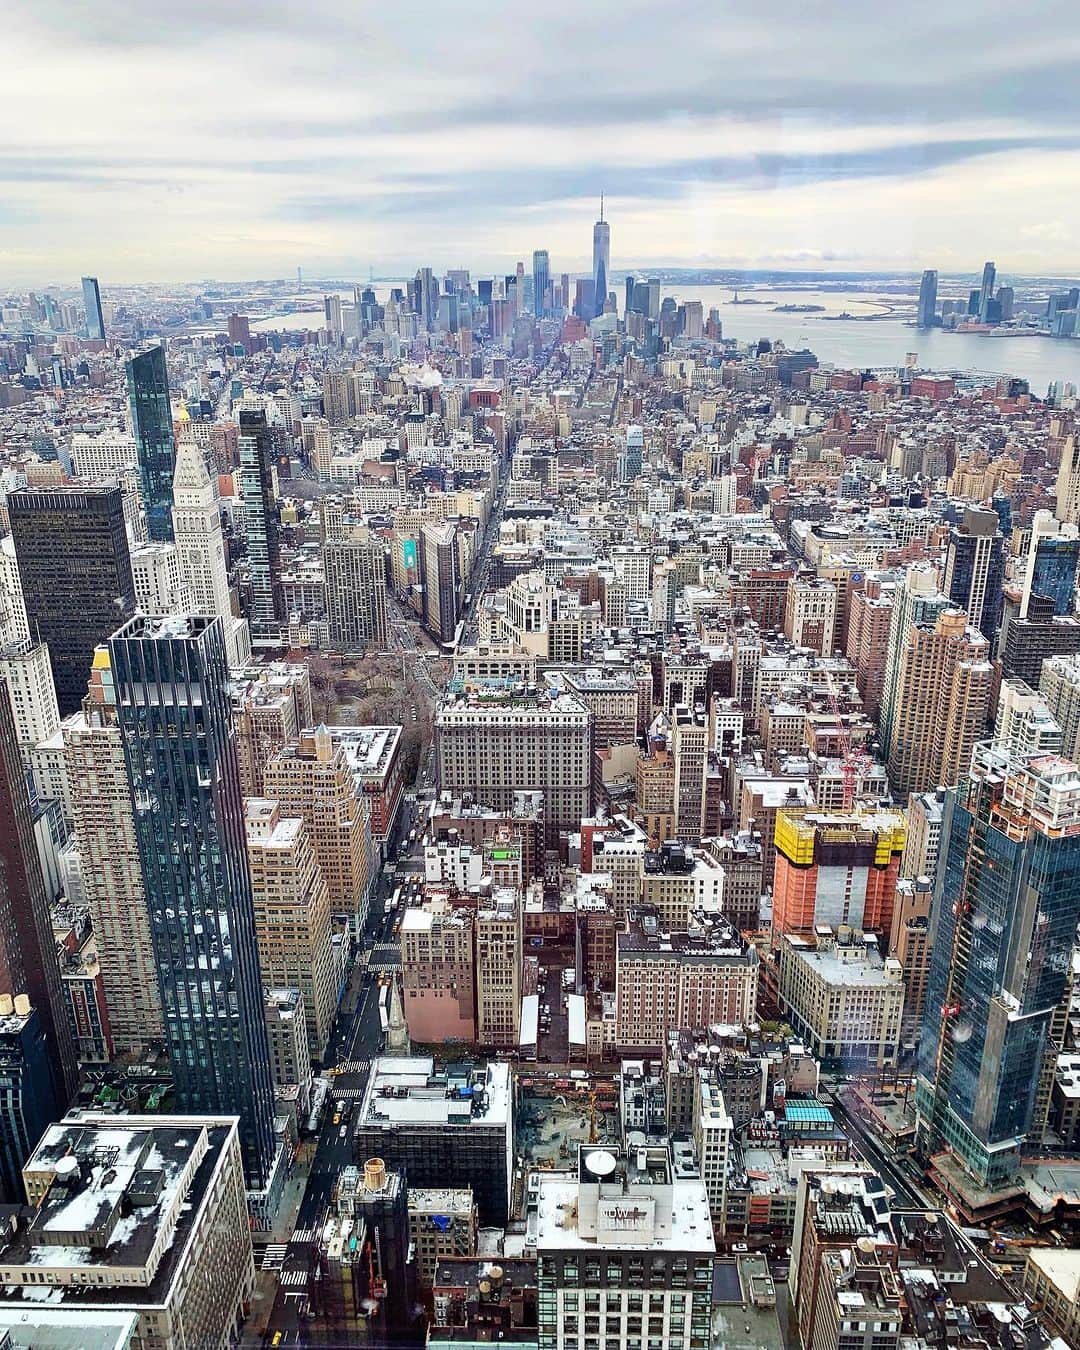 Ilana Wilesさんのインスタグラム写真 - (Ilana WilesInstagram)「Everyone always asks me where they should go in NYC for the best view, so here are my reviews of the most popular vantage points. Photos 1-3: One Vanderbilt is my vote for the best view of NYC. It has the best view of the Empire State Building and the Chrysler Building, which you can find on the east side of the building. It’s also got several ways to see the view— the mirror room, the glass box, the glass elevator, etc so there is a lot to do once you get to the top. Photos 4-5: We loved going to the top of the Empire State Building, especially since there is a ton of NYC nostalgia in their newly built museum. We also spent the extra money to go to the top of the spire, which felt super special because only a few people can go to the very top at a time. But you know what the view is missing? The Empire State Building. Photos 6-7: Top of the Rock is the quintessential view of the city (a view that you’ll recognize from a lot of movies), with the iconic viewfinders, and I love that you can see both the Southern view of the city with the ESB and the northern view which includes Central Park, but the “experience” to get to the top feels like it needs an update. Photos 8-9: The Edge is cool with its triangular glass balcony, and if you are willing to wait in line for the corner shot, you will get a great photo, but you can’t see a lot of the iconic NYC buildings from that vantage point on the west side. Photo 10) One World Trade is the highest vantage point in the city, and you see all of the Island of Manhattan sprawling out before you, with an up-close view of the downtown skyline and the ESB in the distance. Its also got a great view of all the bridges. It was cloudy the day we went so i didn’t get the best pictures. But the part that really got me was the film that plays once you reach the top. It’s about the strength of New Yorkers and our ability to rebuild and then ends with revealing the view. Took my breath away!」10月5日 3時38分 - mommyshorts